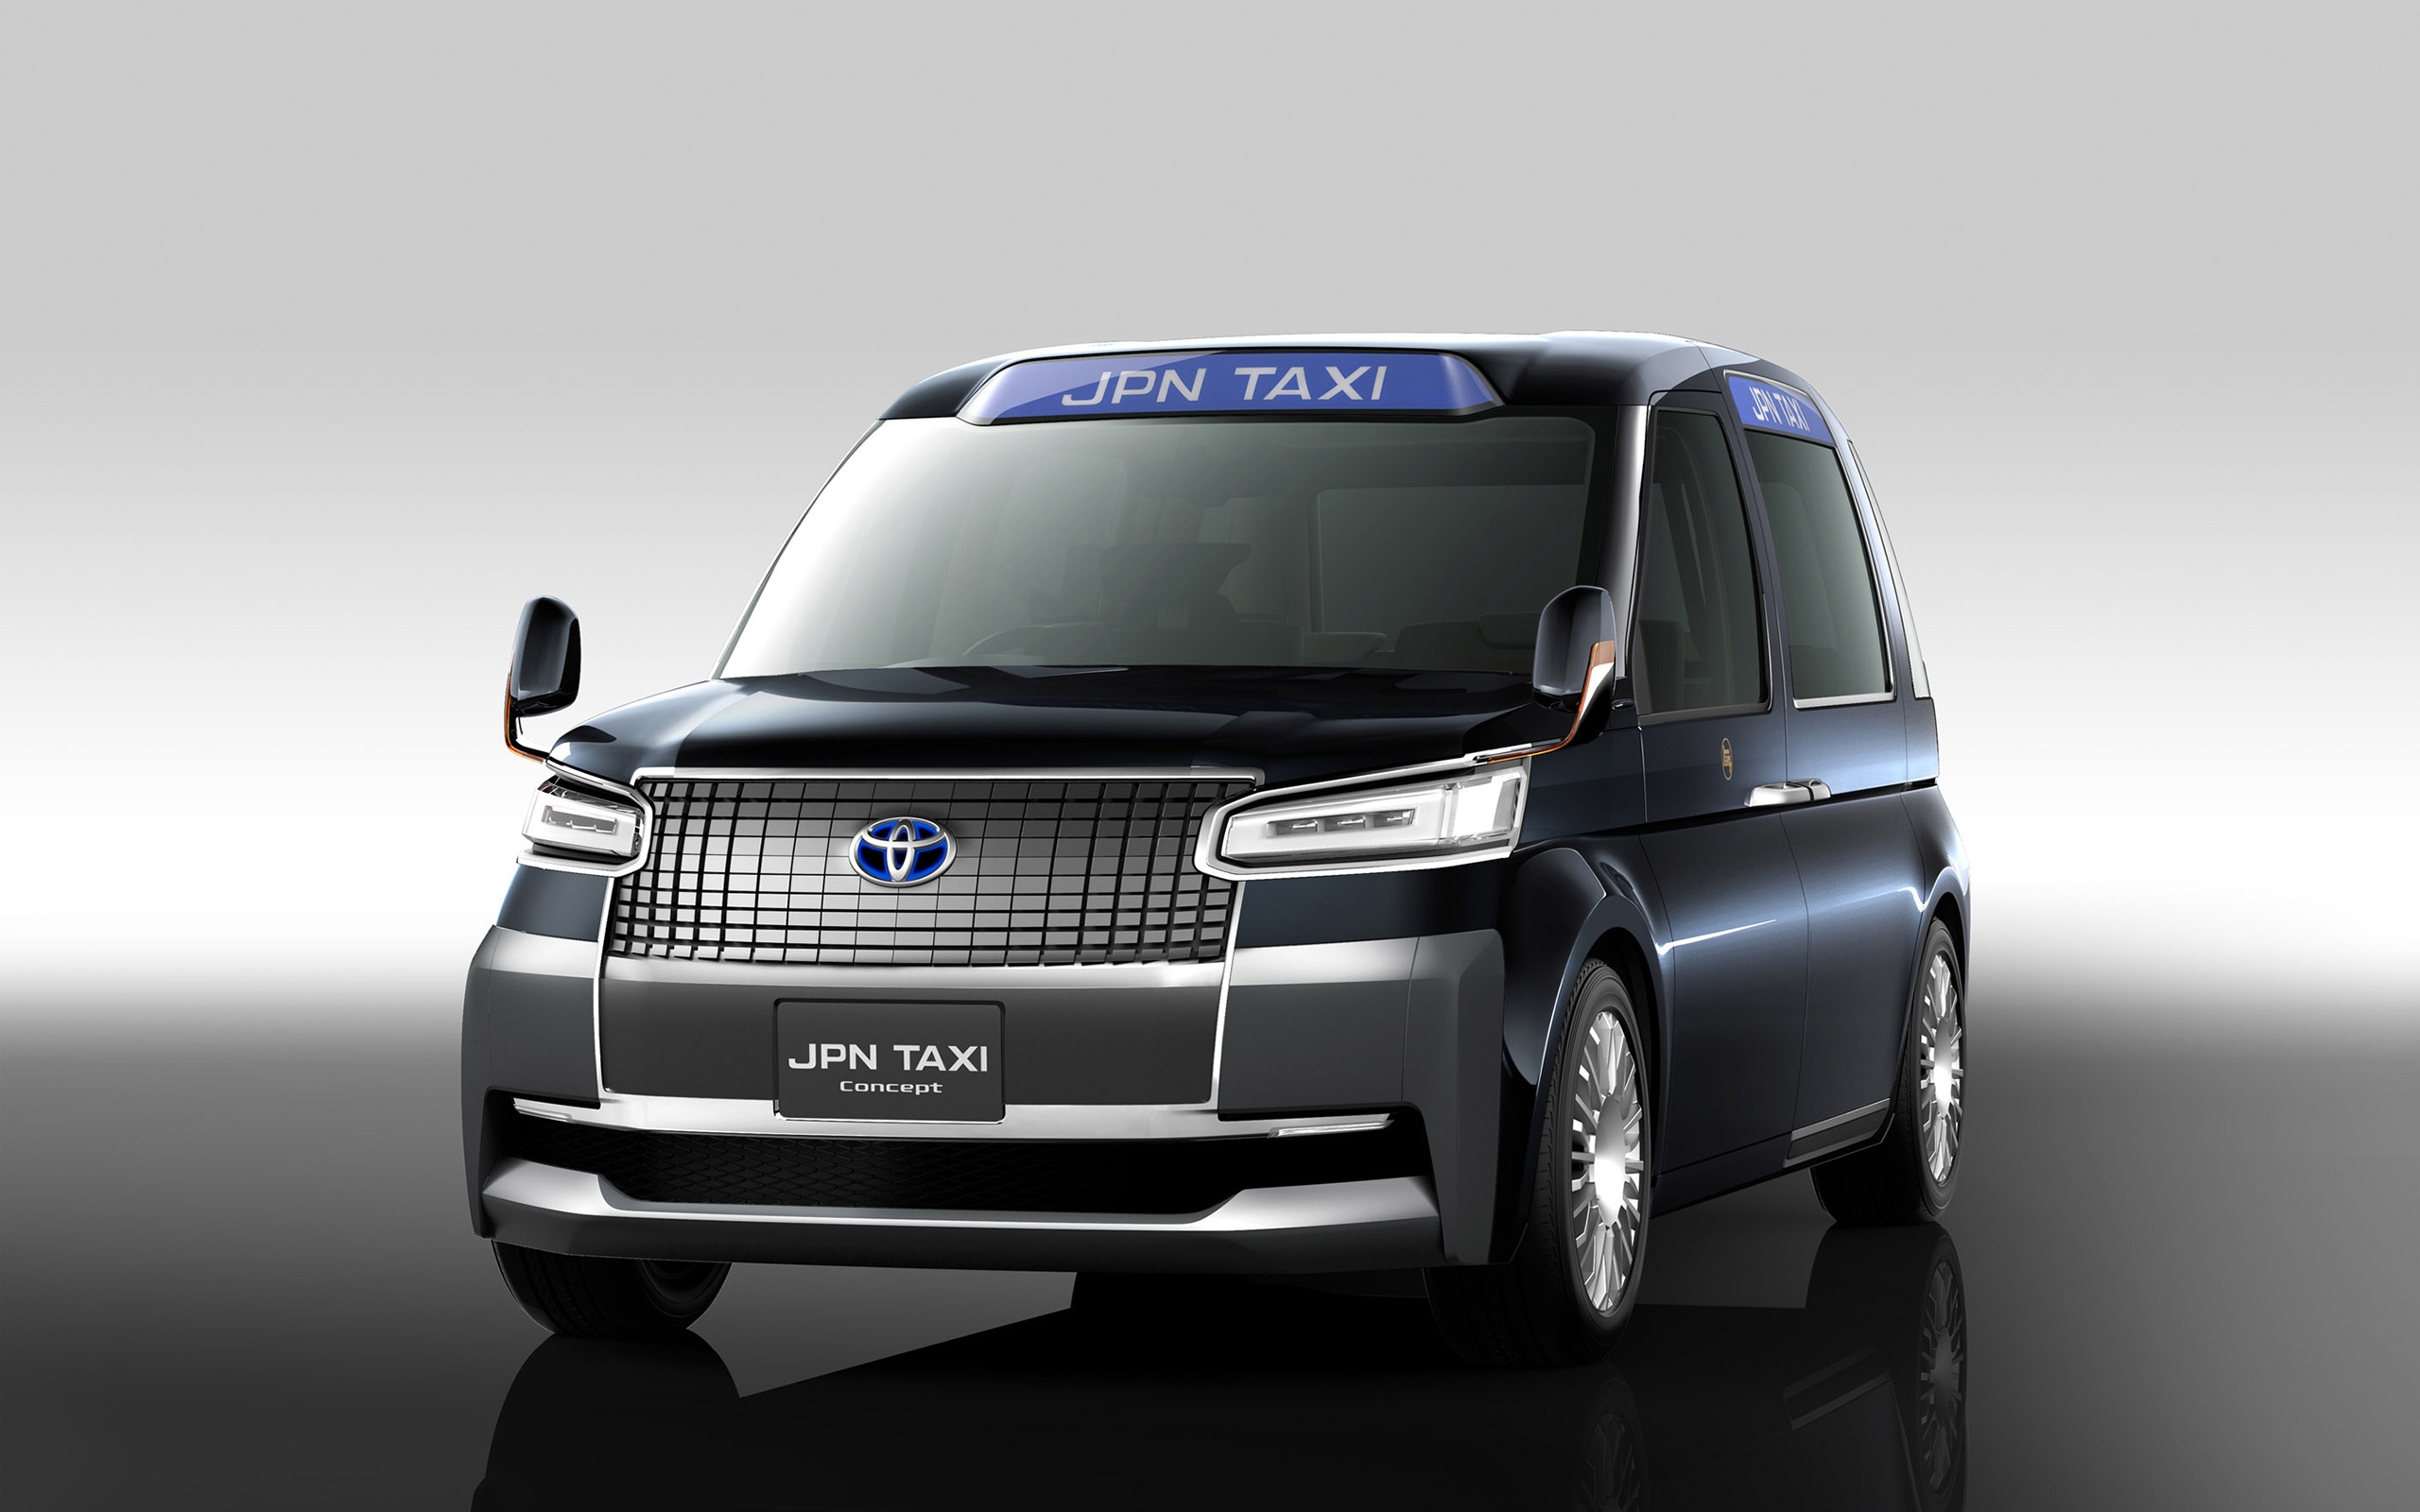 Toyota Japan Taxi Concept Car for 2560 x 1600 widescreen resolution